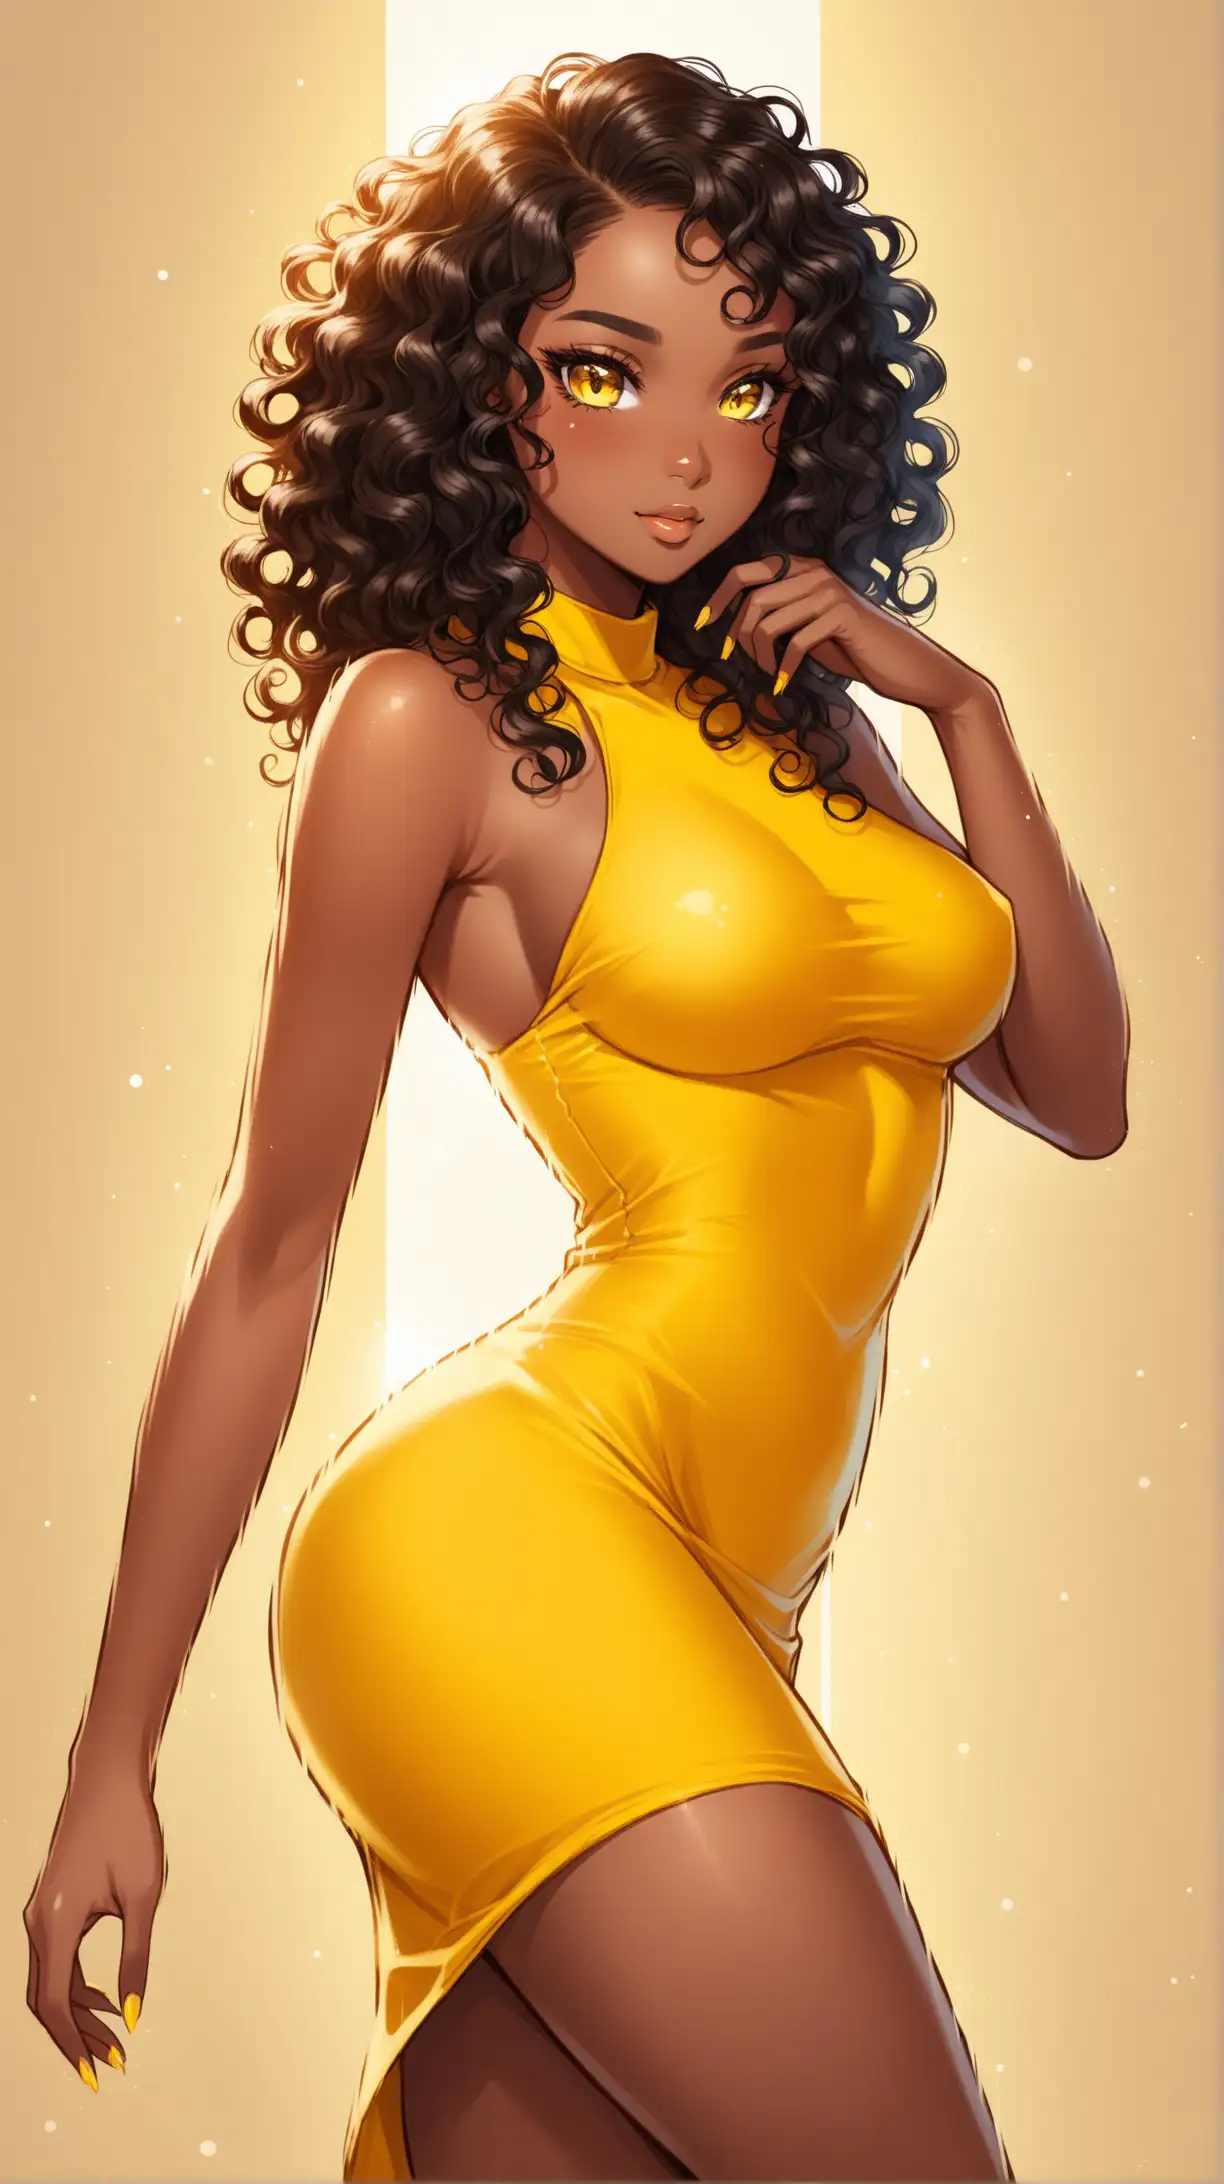 Curly Haired Ebony Girl in Vibrant Yellow Dress